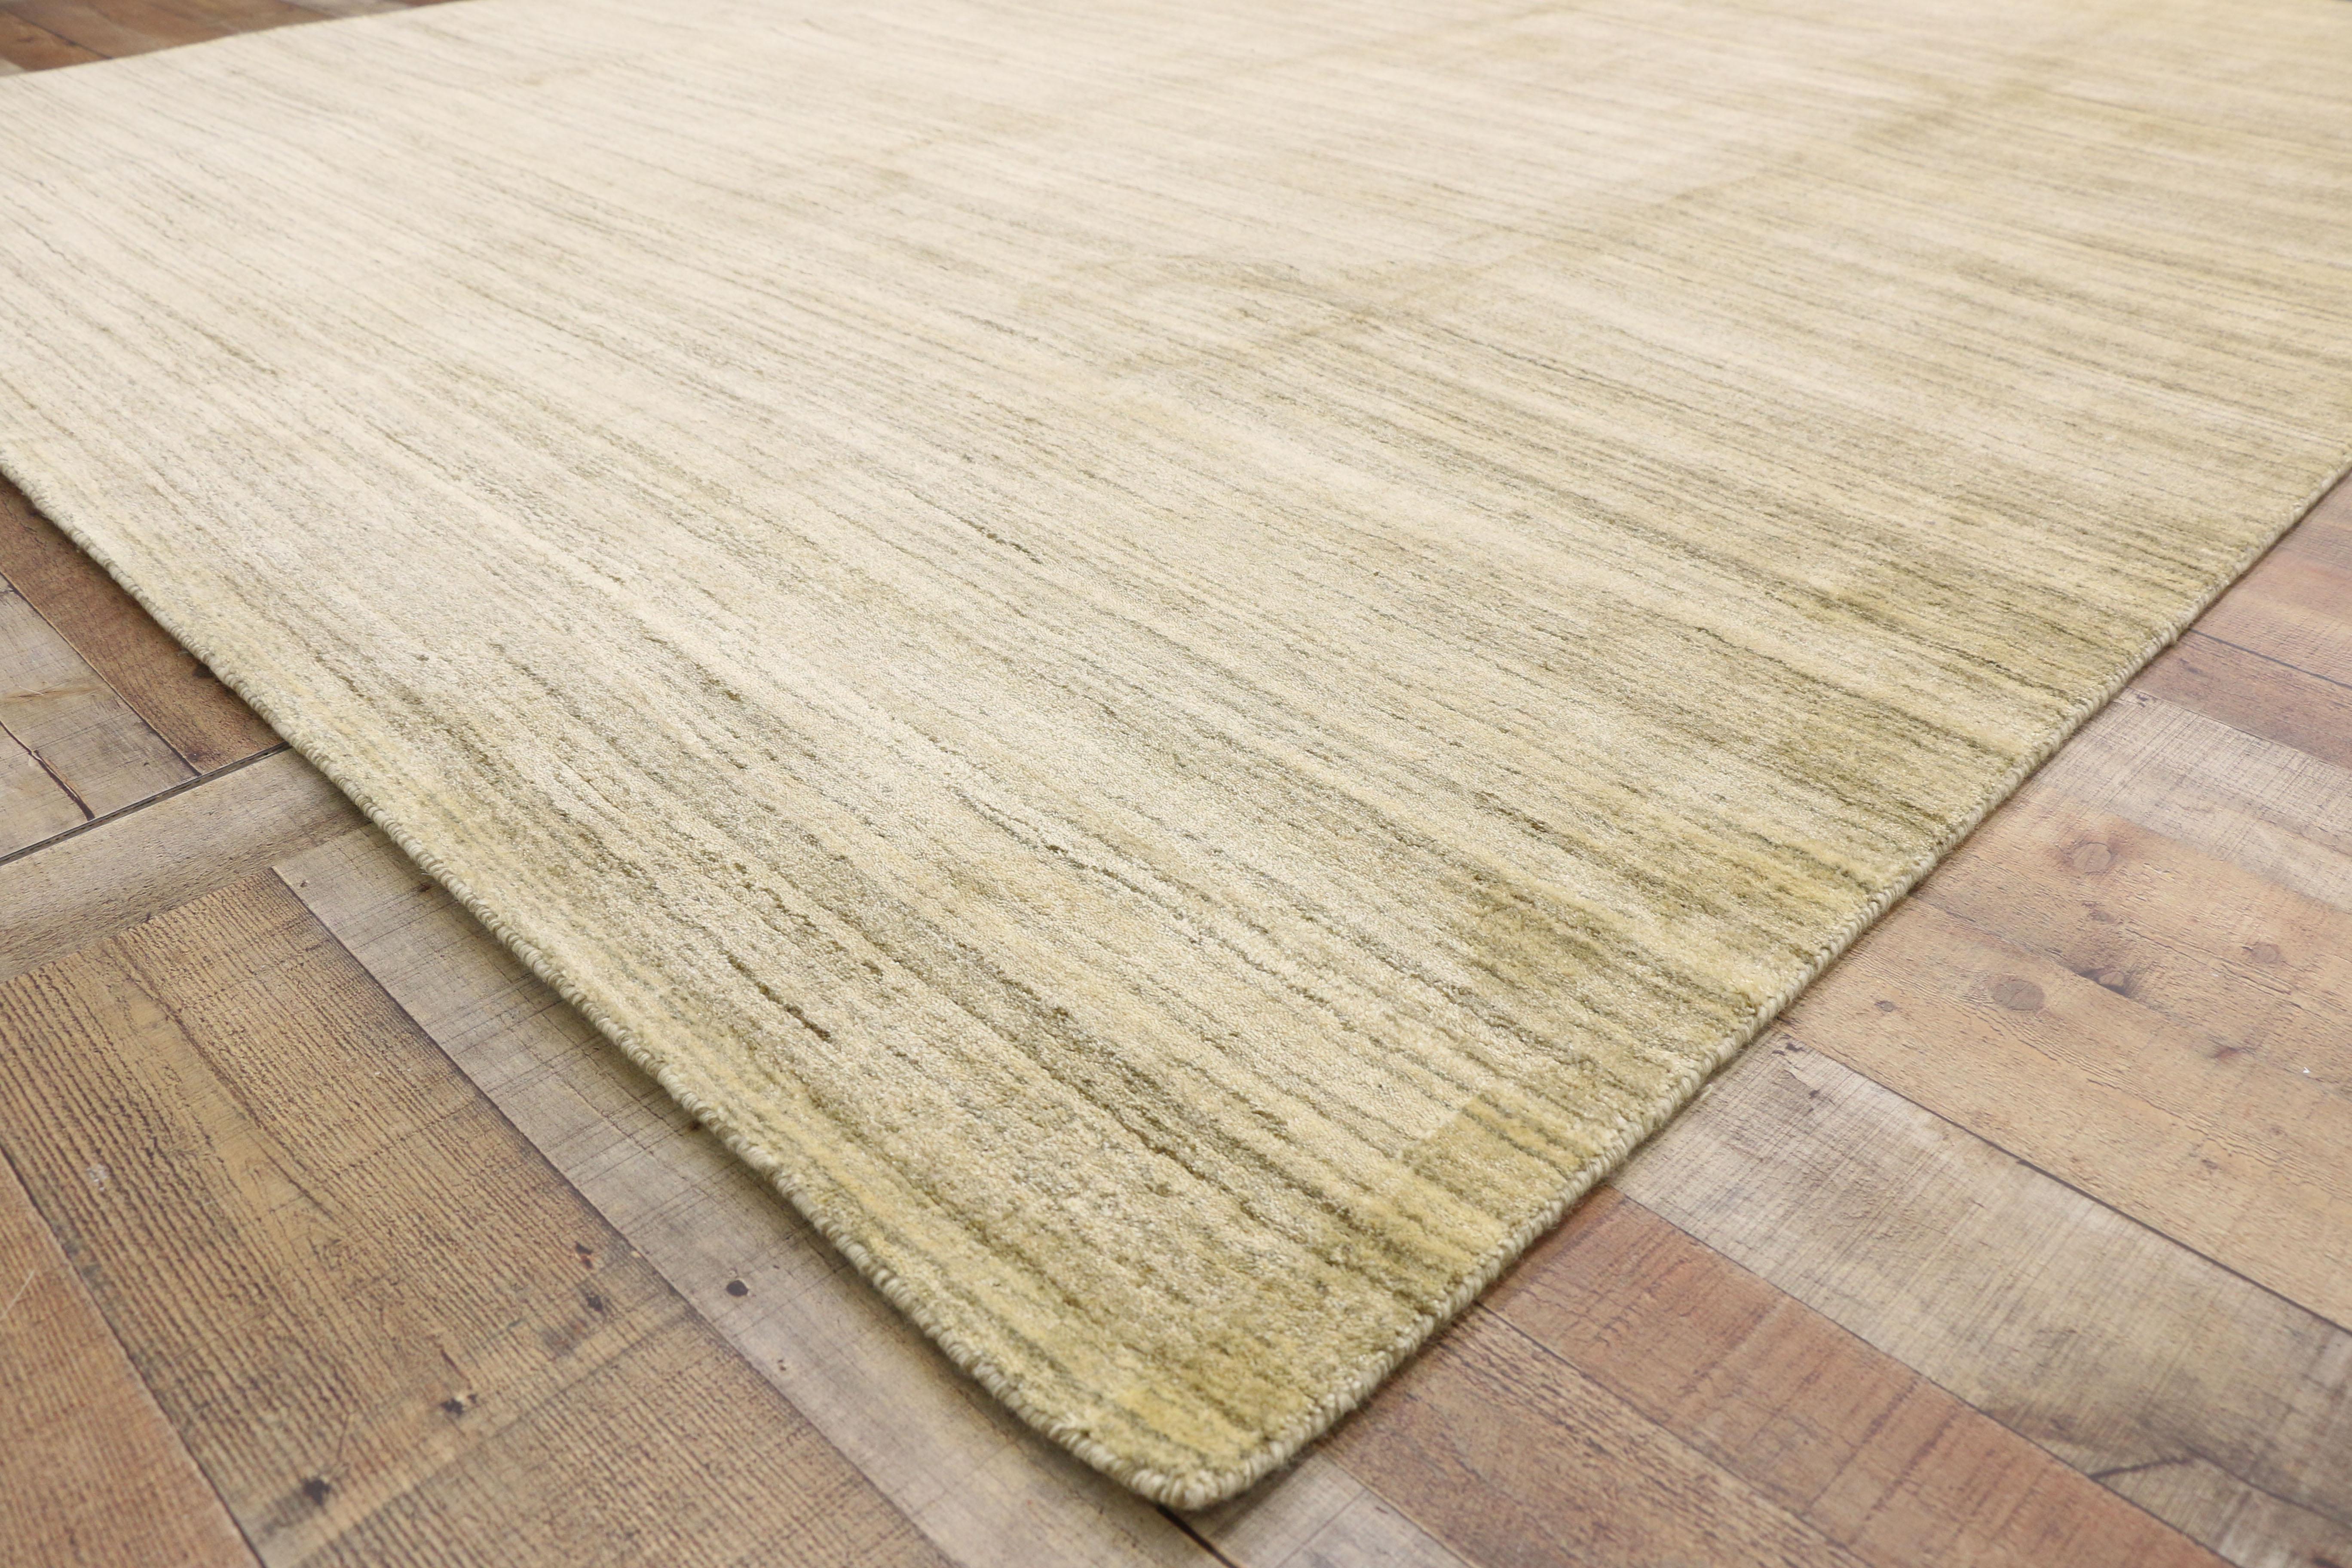 Indian New Transitional Area Rug with Cozy, Hygge Vibes and Warm Amish-Shaker Style For Sale